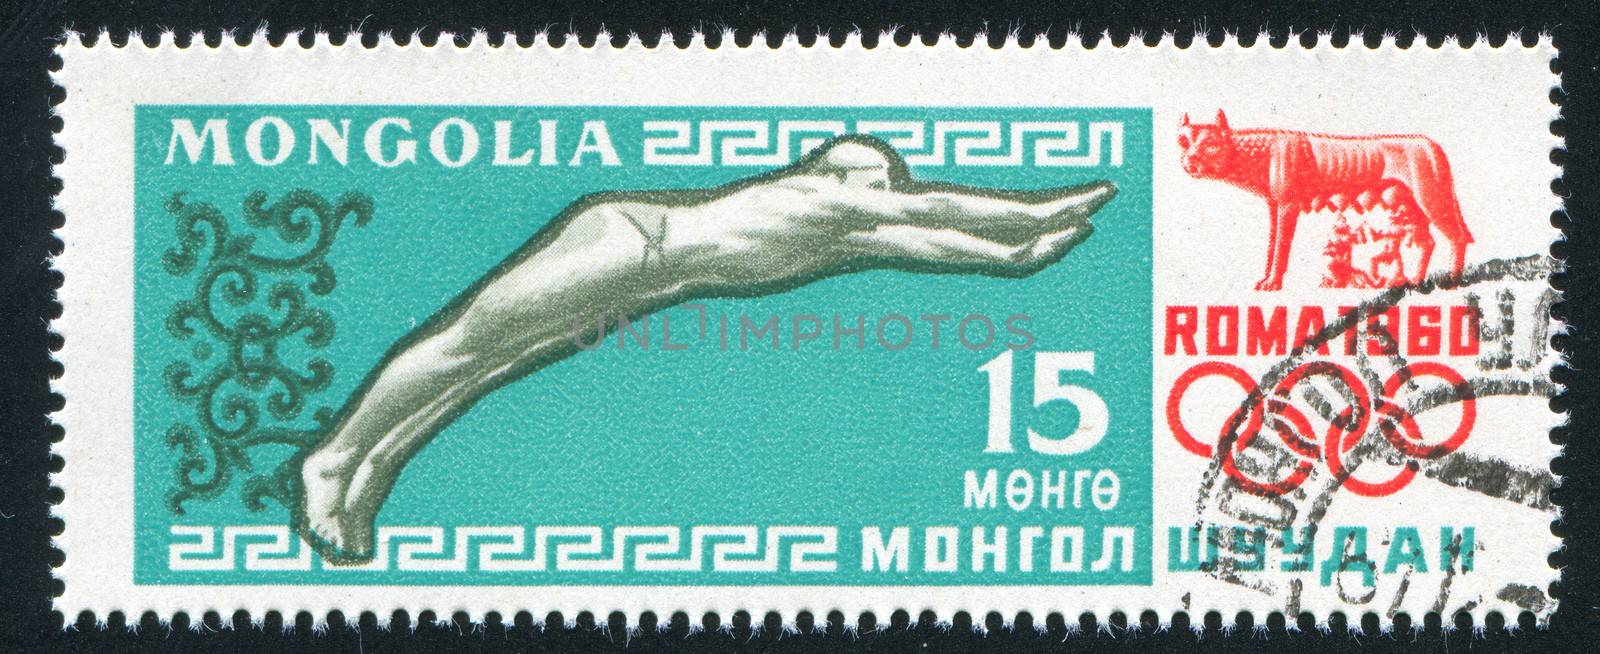 MONGOLIA - CIRCA 1960: stamp printed by Mongolia, shows Swimmer at The Olympic Games in Roma, circa 1960